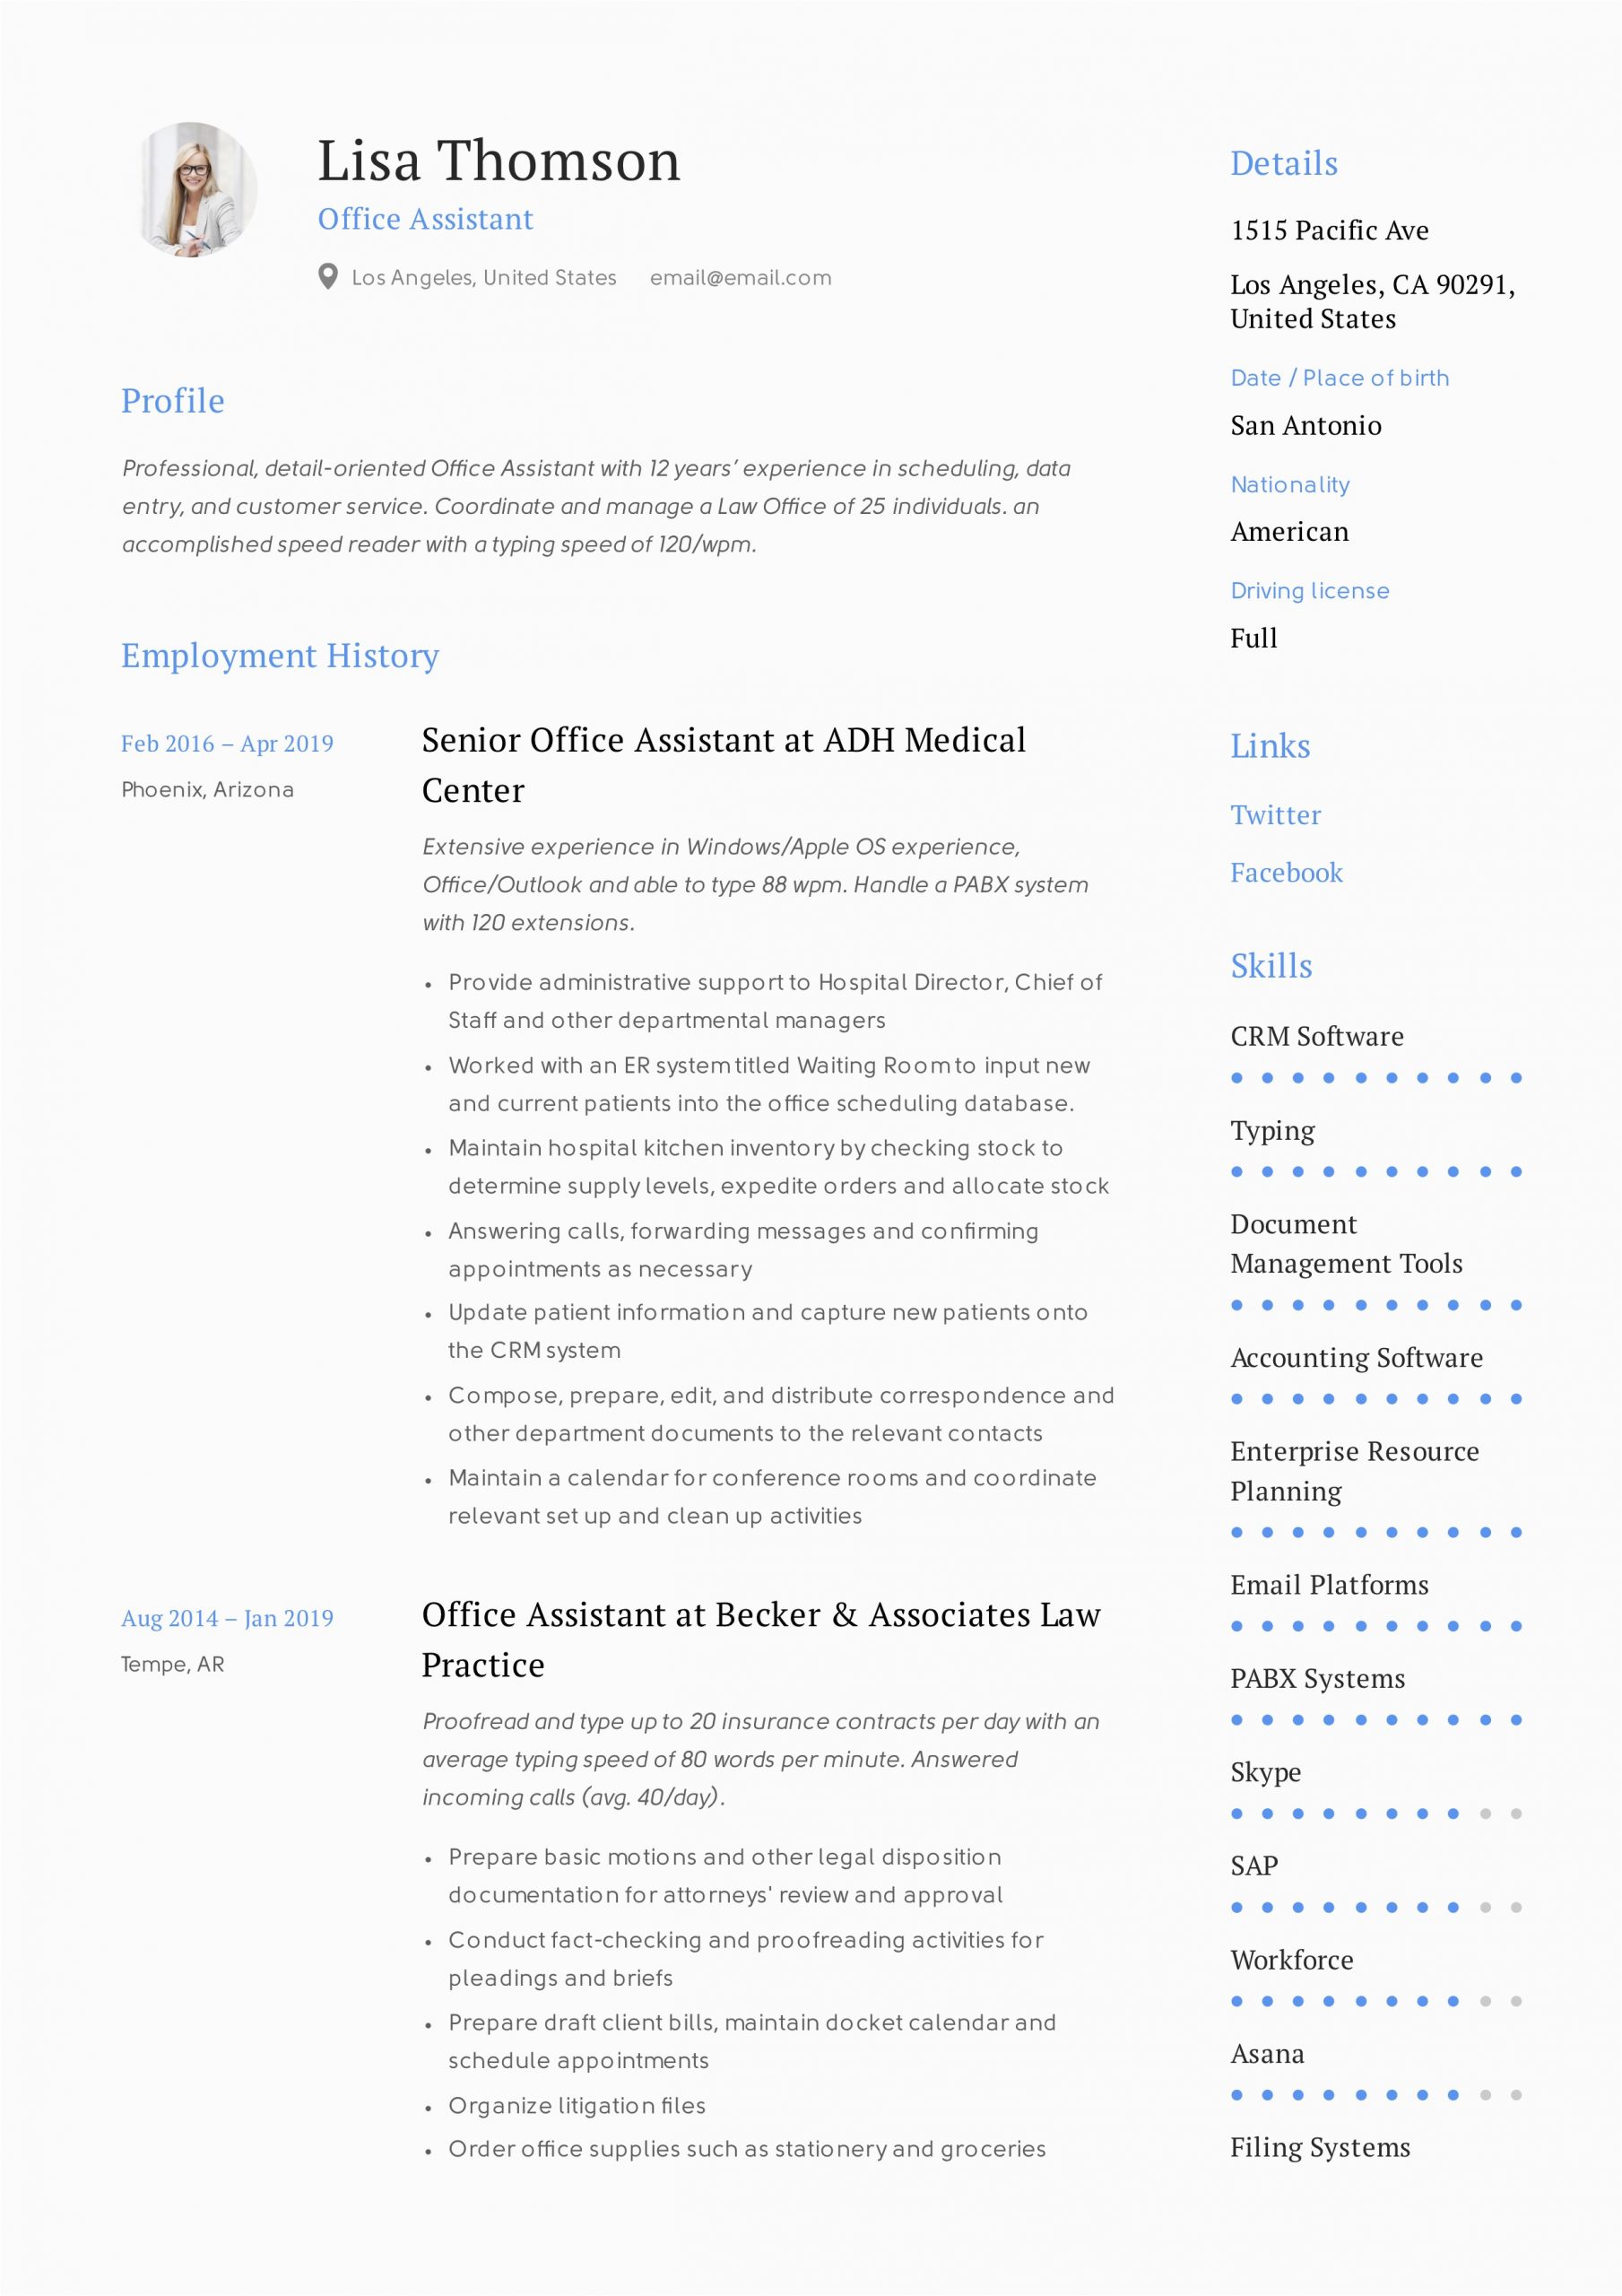 Resume Samples for Office assistant Job Fice assistant Resume Writing Guide